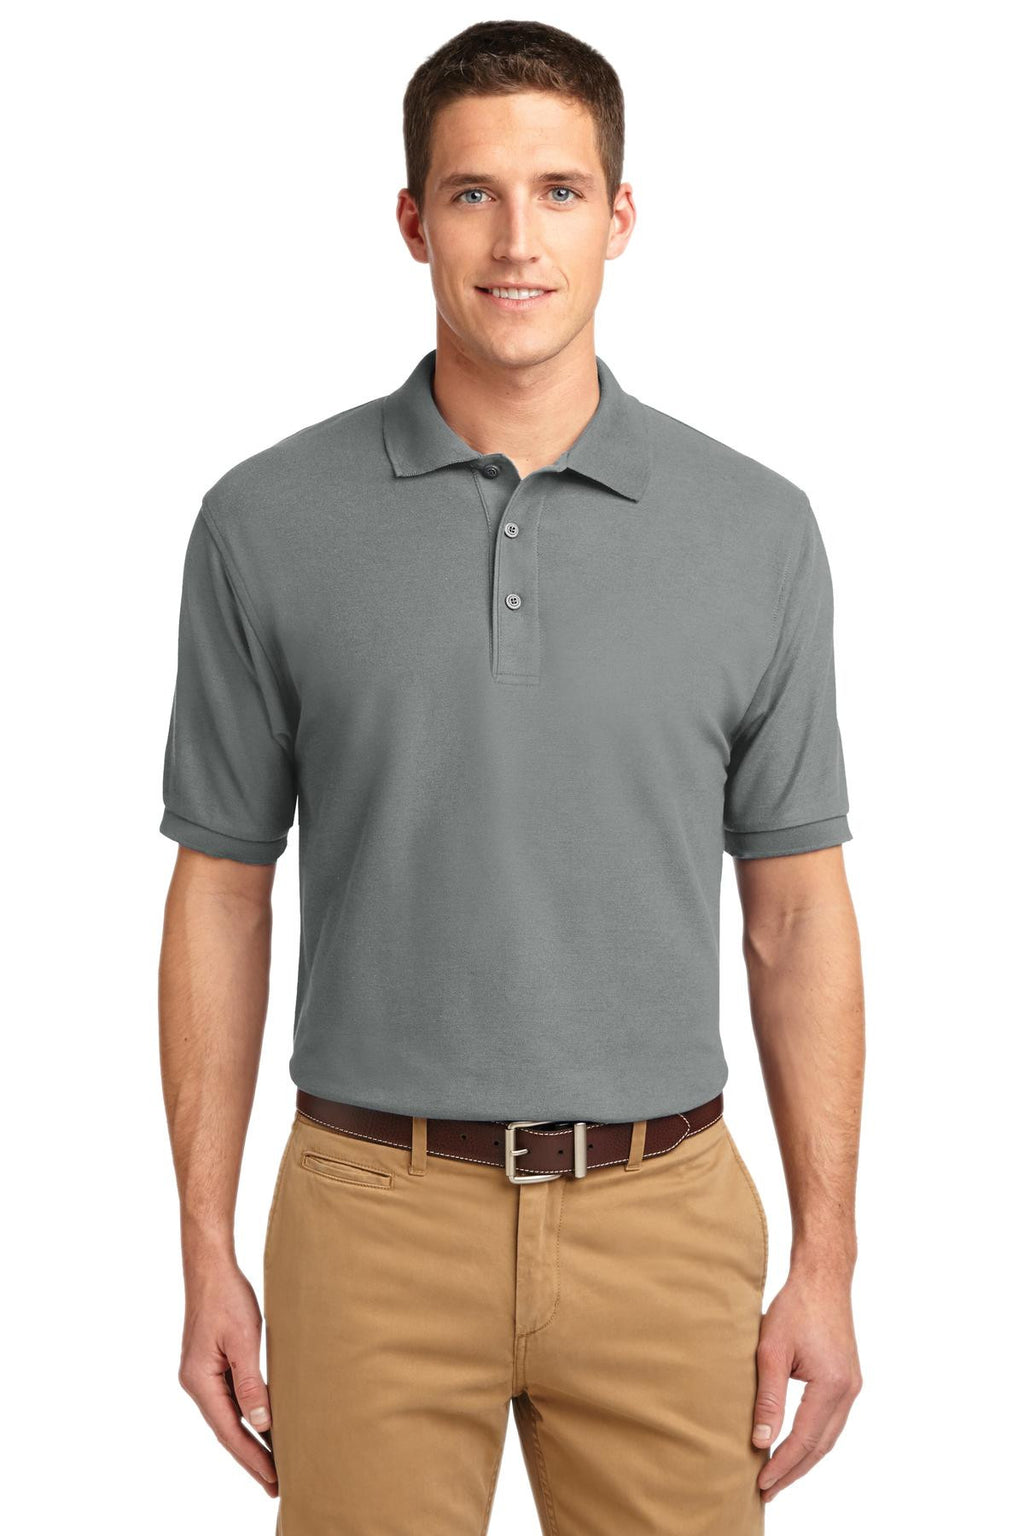 Port Authority Men's Silk Touch Polo Shirt BIG and REGULAR SIZES-1